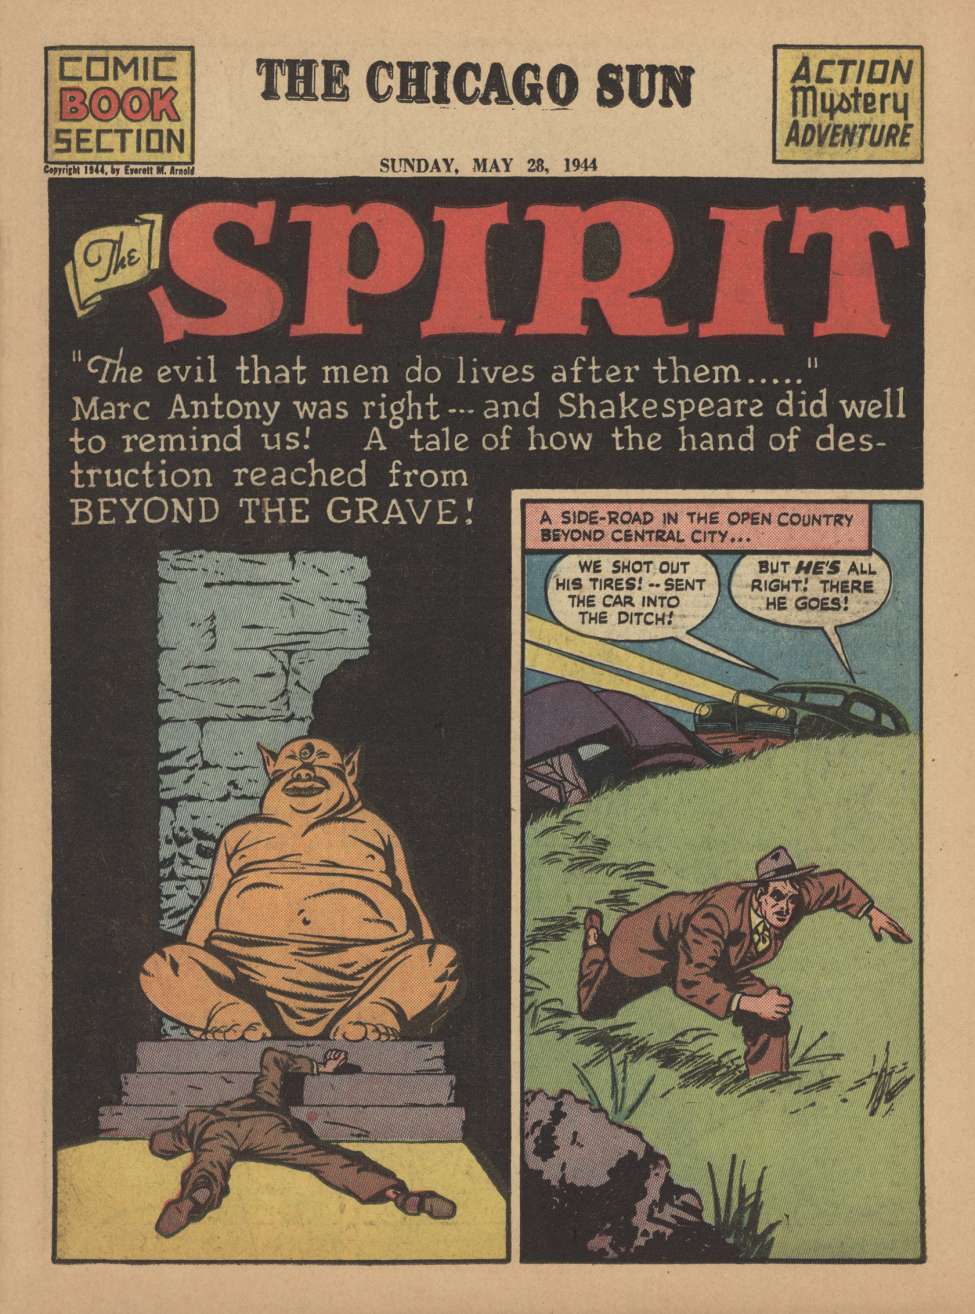 Comic Book Cover For The Spirit (1944-05-28) - Chicago Sun